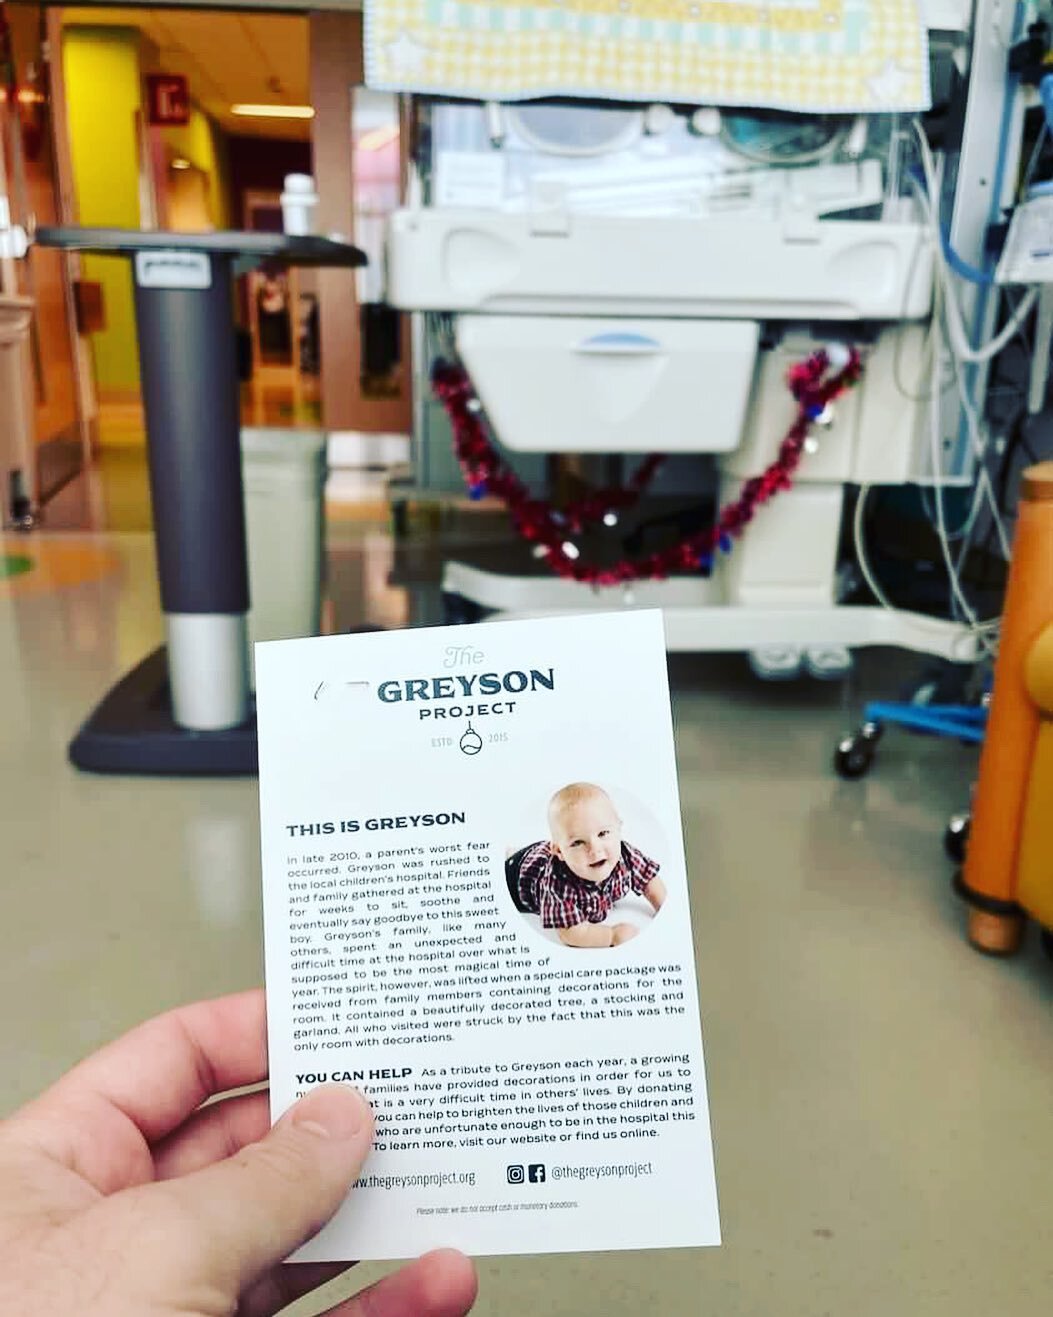 Your bags and goodies go to children of all ages! 

&ldquo;Good morning Greyson Project Team! My name is Frank and today is my wife and I&rsquo;s 39 day in the NICU here at Nemours and we wanted to thank you so much for your gift. 

Our baby boy, Sil